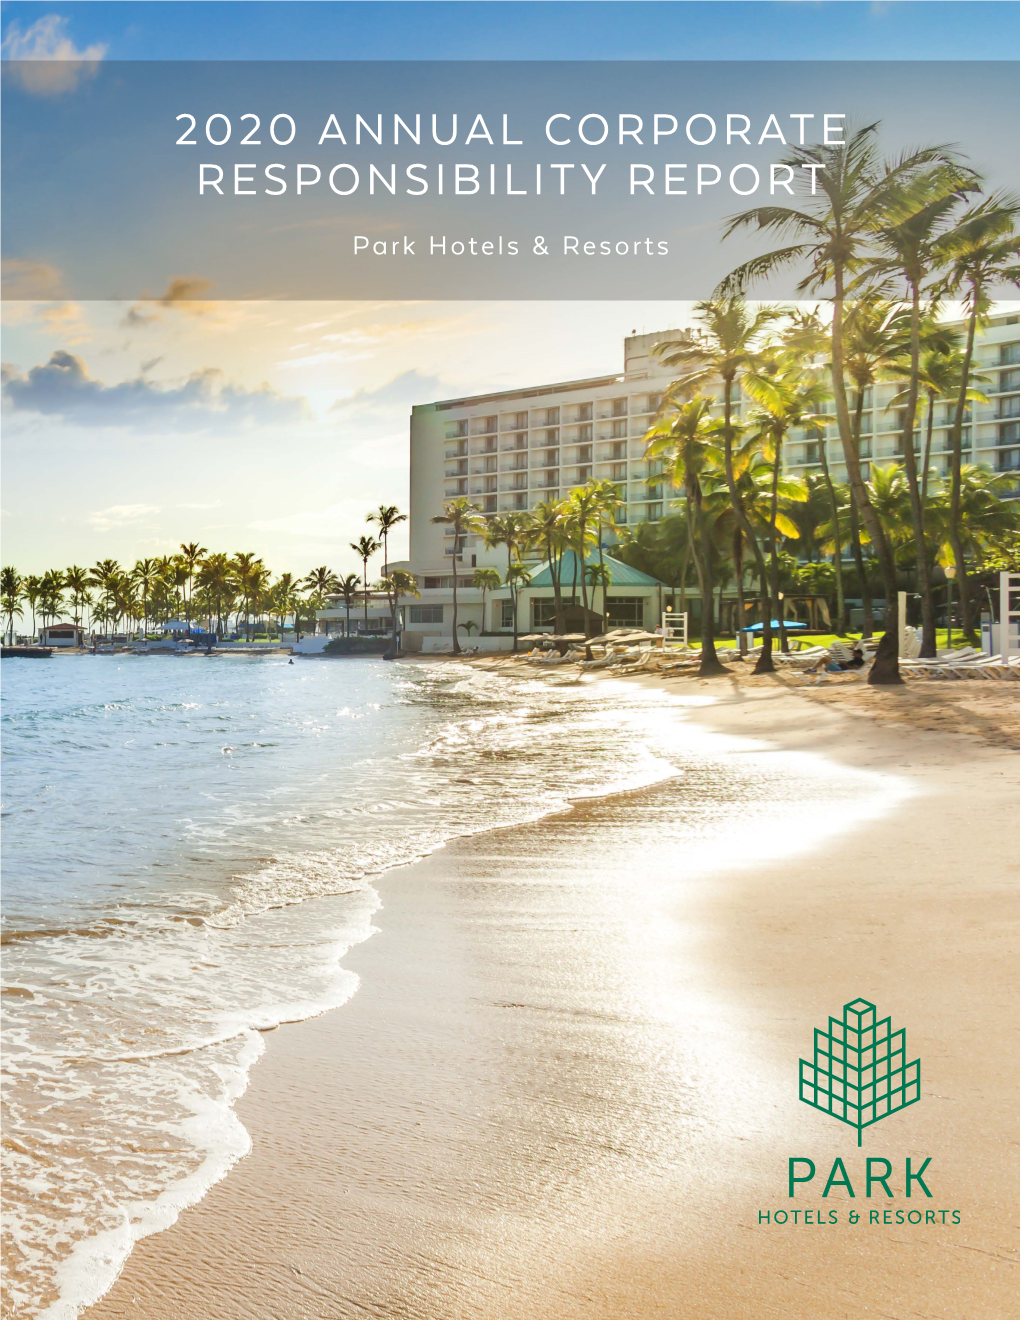 2020 ANNUAL CORPORATE RESPONSIBILITY REPORT Park Hotels & Resorts Cover Photo: Caribe Hilton W New Orleans – French Quarter